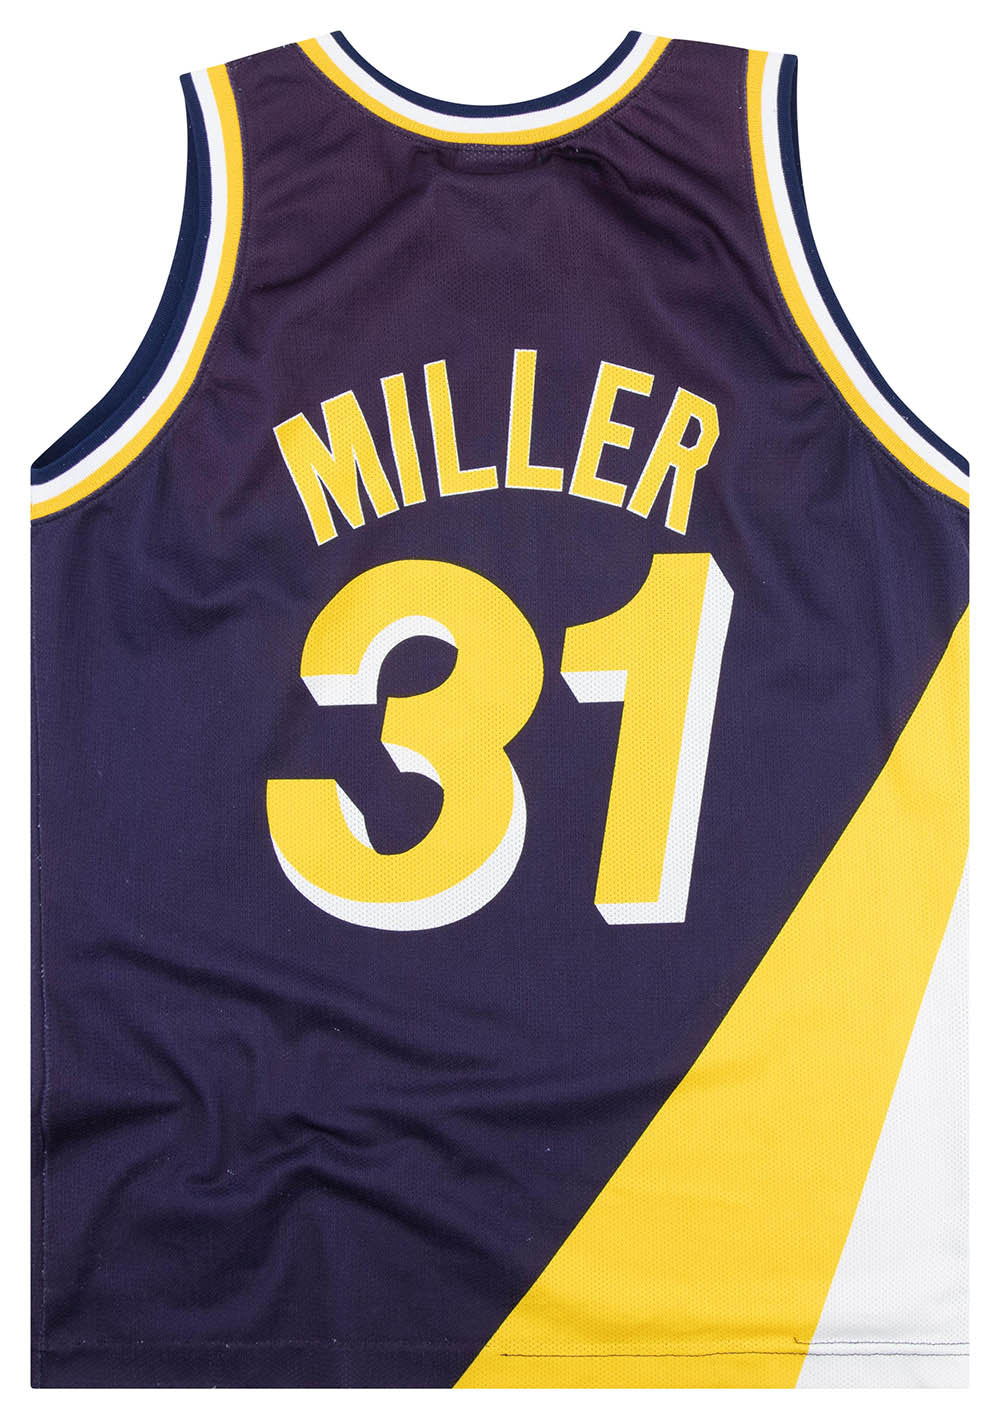 1991-97 INDIANA PACERS MILLER #31 CHAMPION JERSEY (AWAY) L